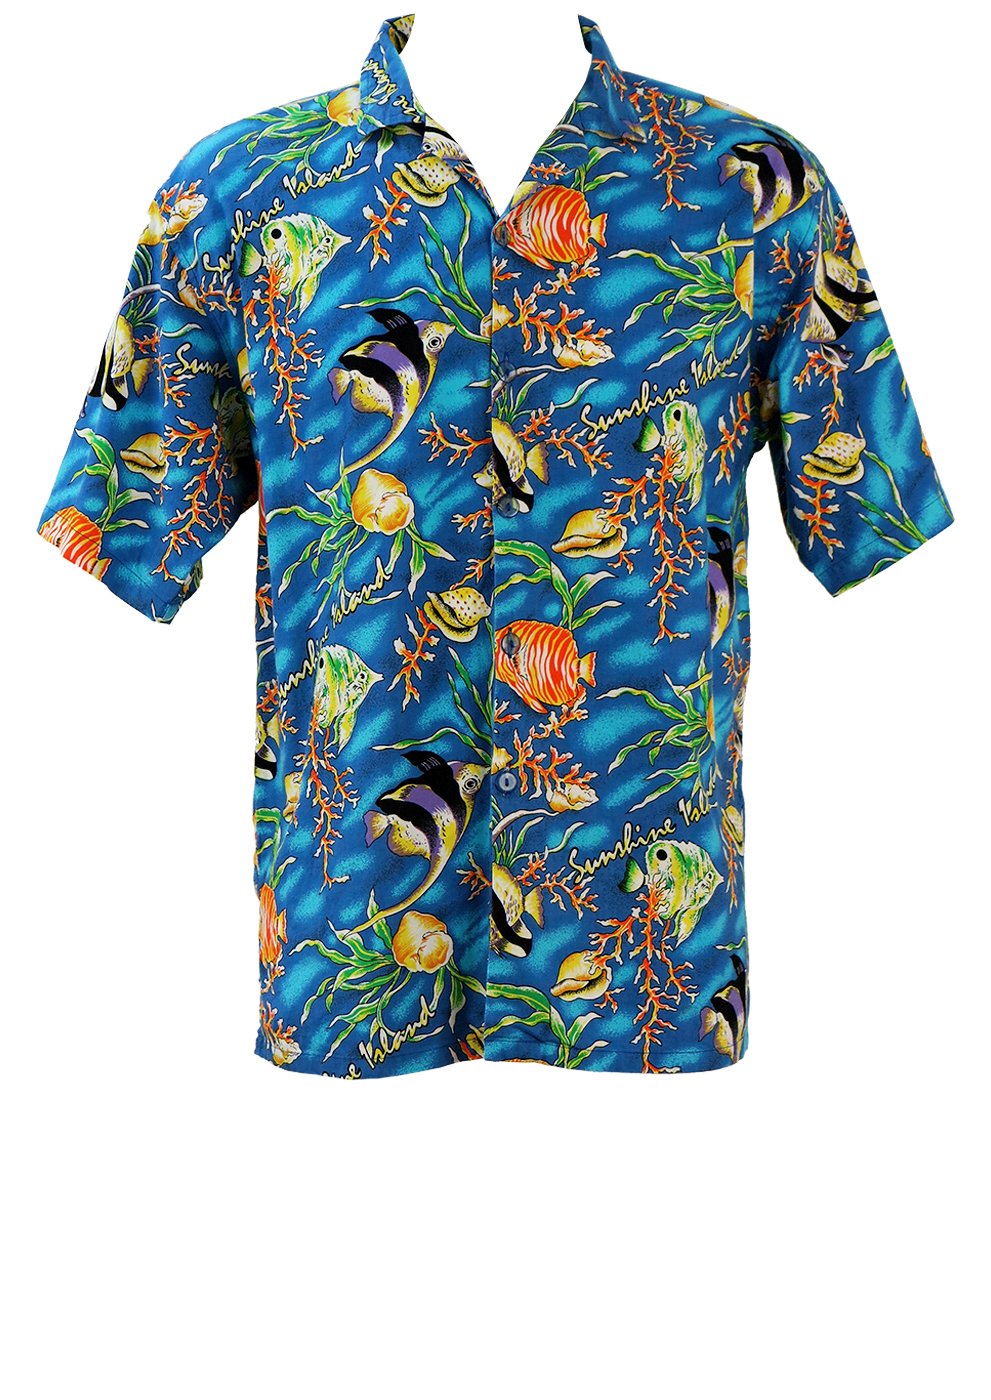 Blue Short Sleeved Hawaiian Shirt with Multicoloured Tropical Fish Graphic  - L/XL